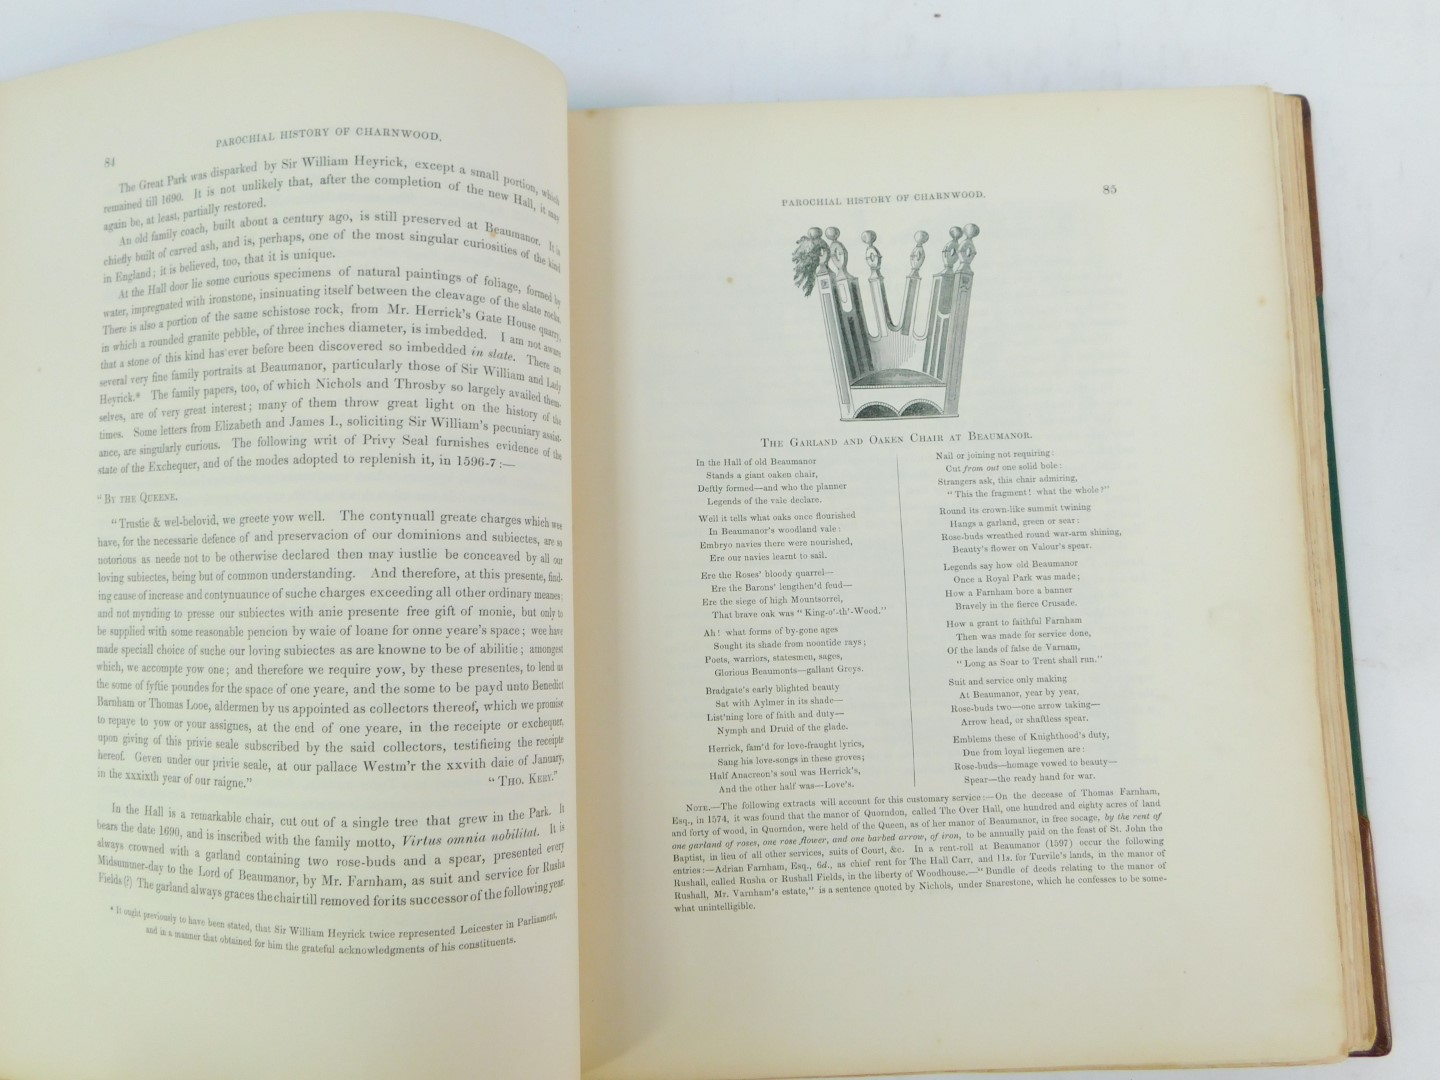 Potter (T R). The History and Antiquities of Charnwood Forest, with illustrations, published by - Image 6 of 6